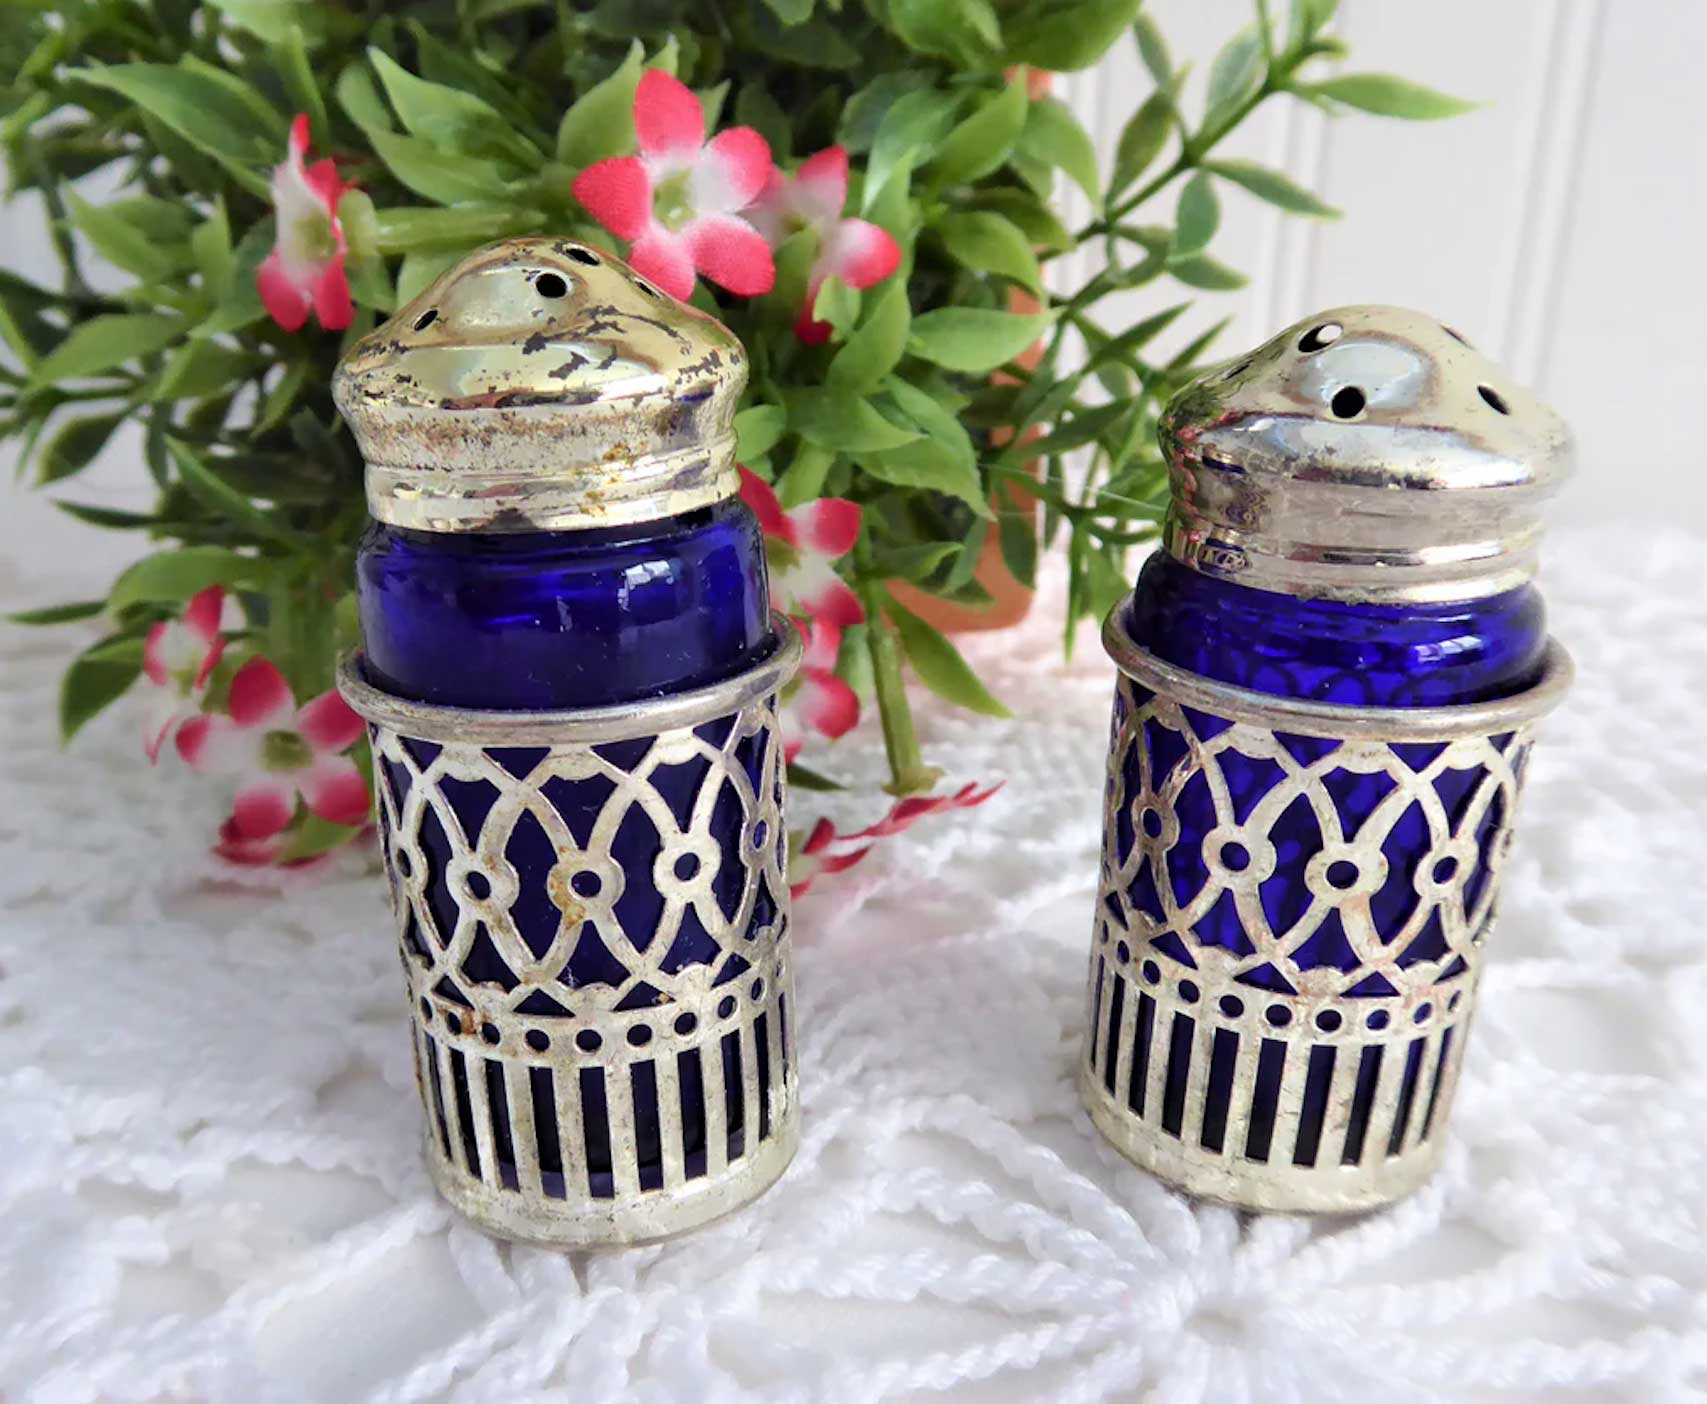 Two of a kind Salt and pepper shakers make inexpensive, colorful collectibles